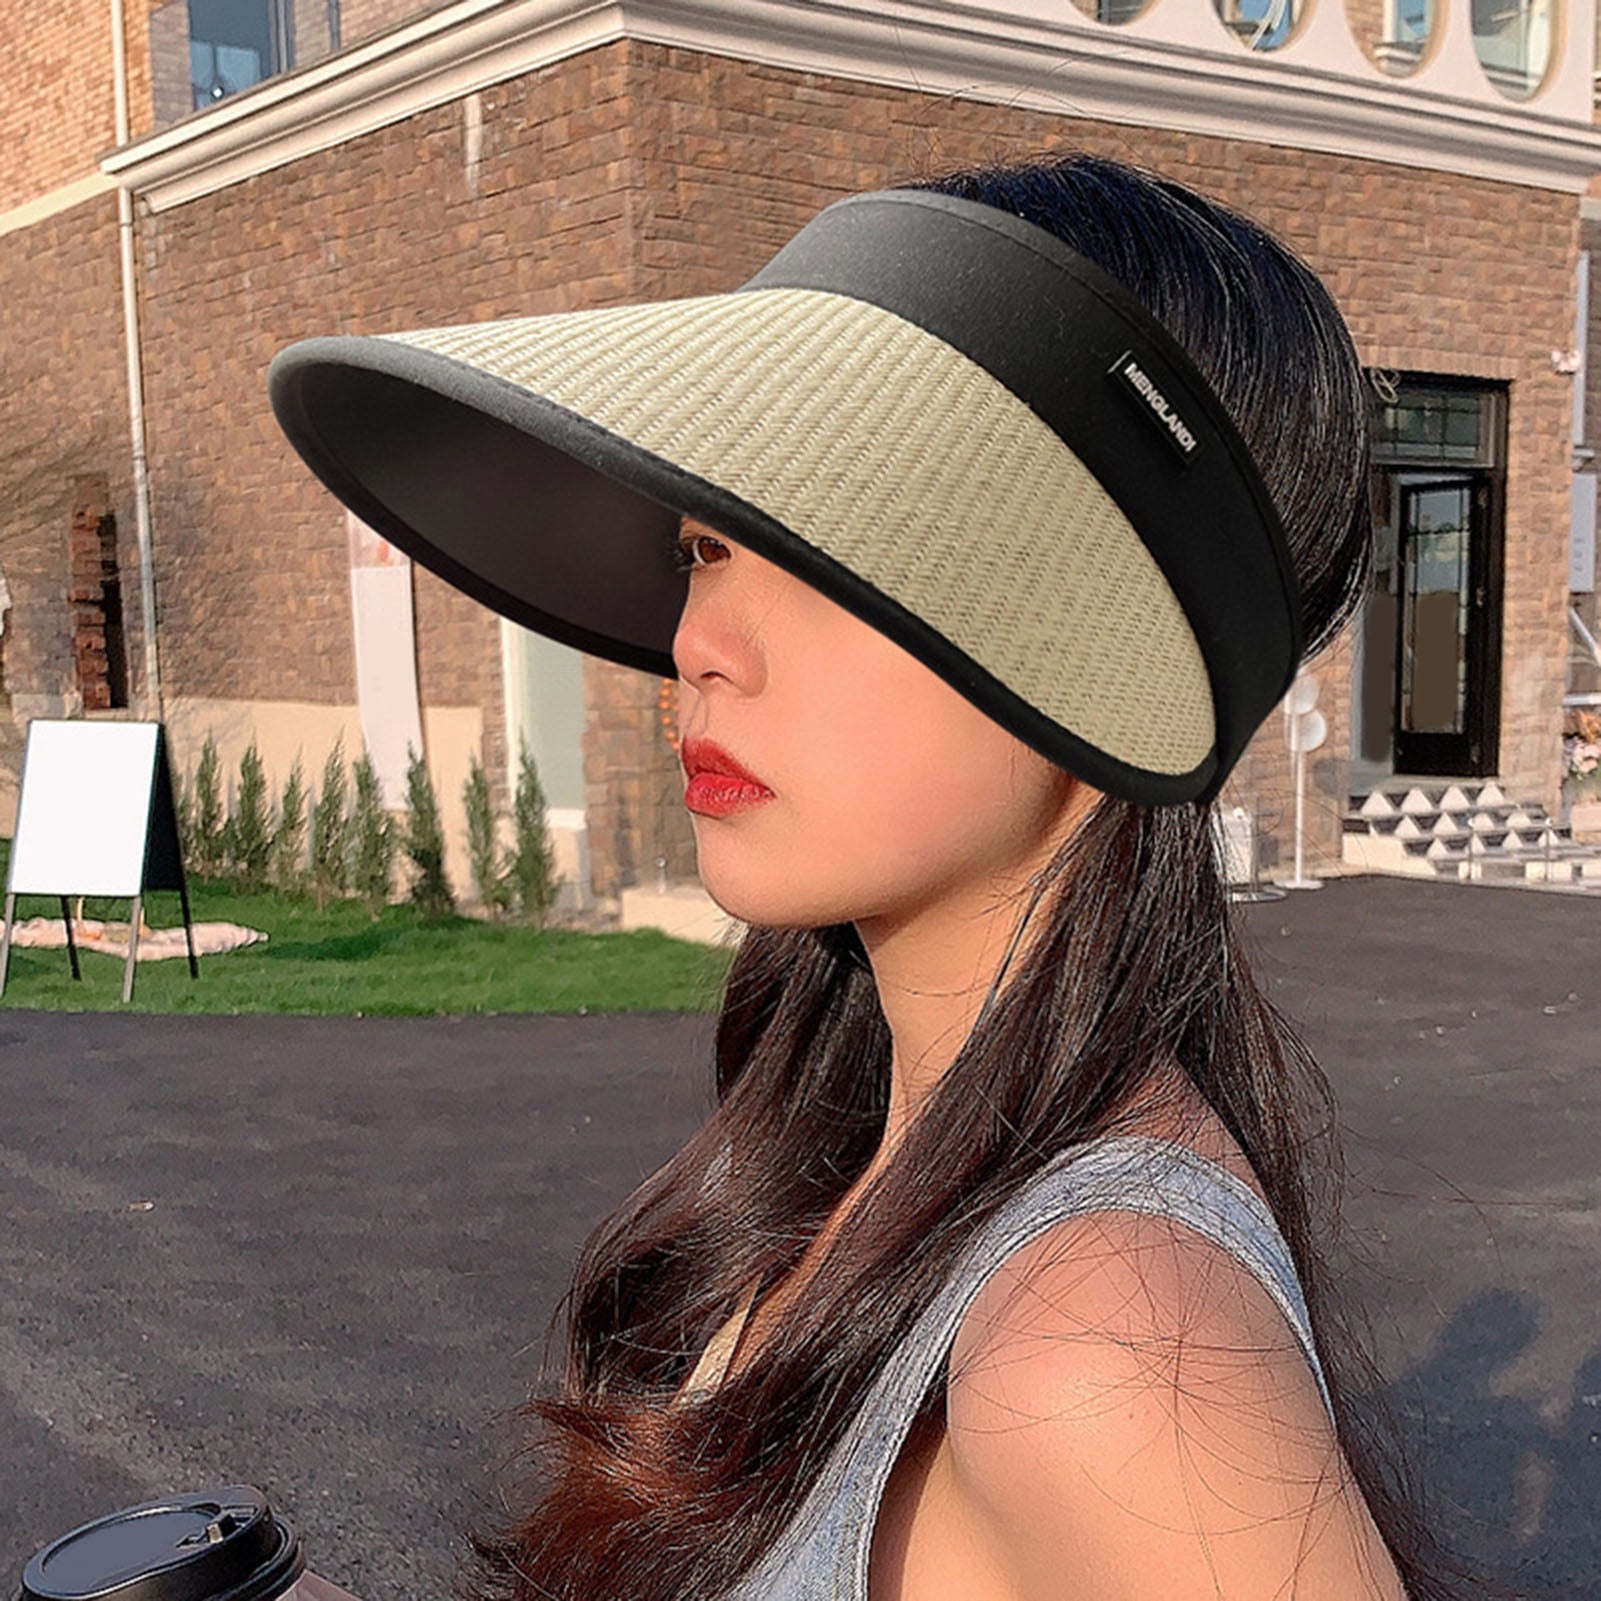 Women's Foldable Floppy Hat, Fashion Bow Wide Brim Sun Protection Hats,  Summer Uv Protection Cap Travel Outdoor Beach Visor Caps